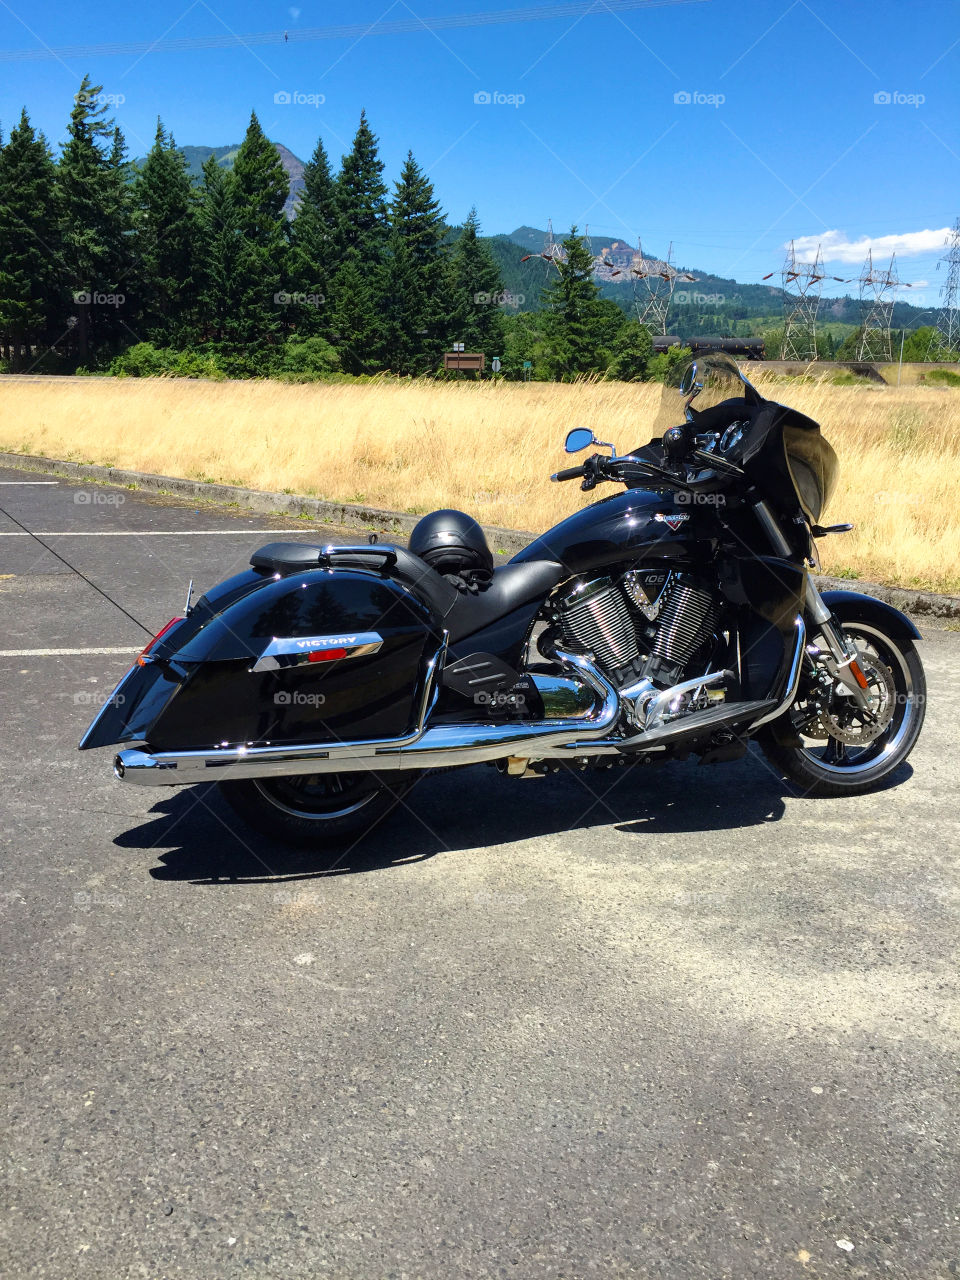 2015 Victory Cross Country. Scenic View at Bonneville Dam With My 2015 Victory Cross Country Motorcycle